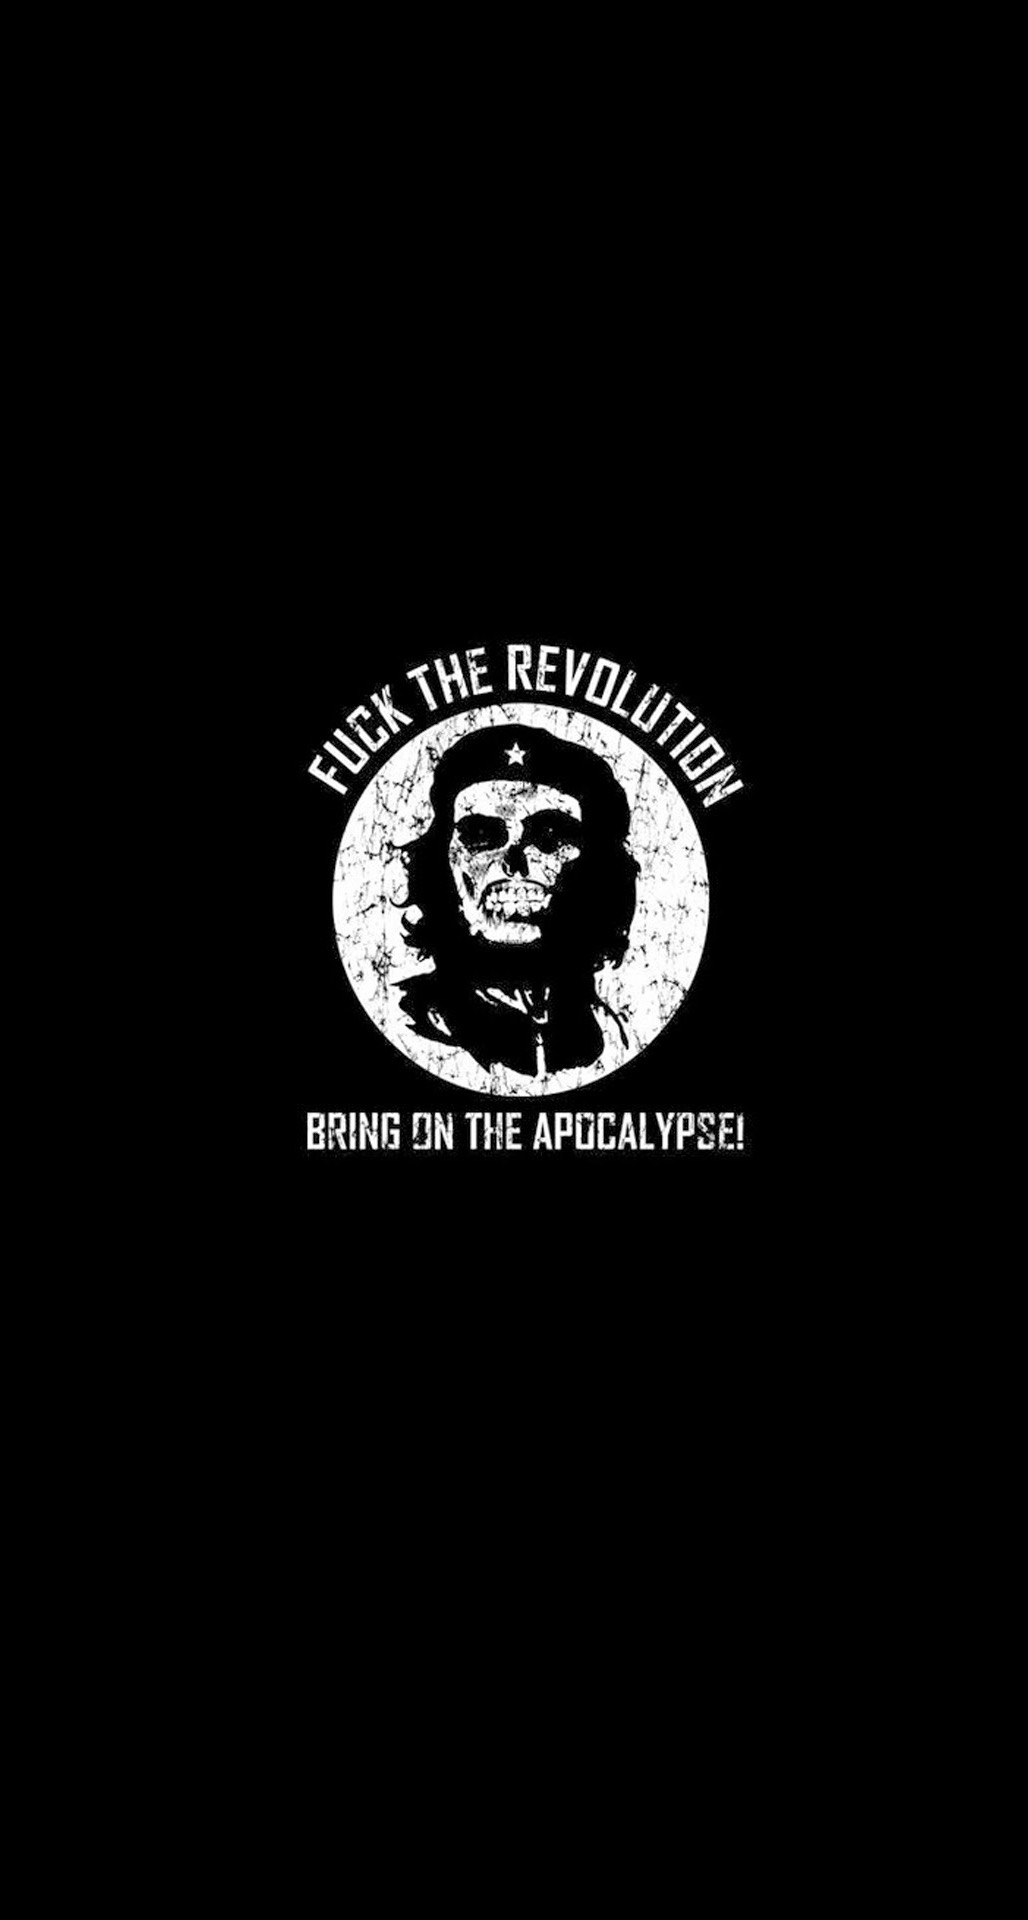 Bring-On-The-Apocalypse-Che-Guevara-iPhone-6-Plus-HD-Wallpaper.